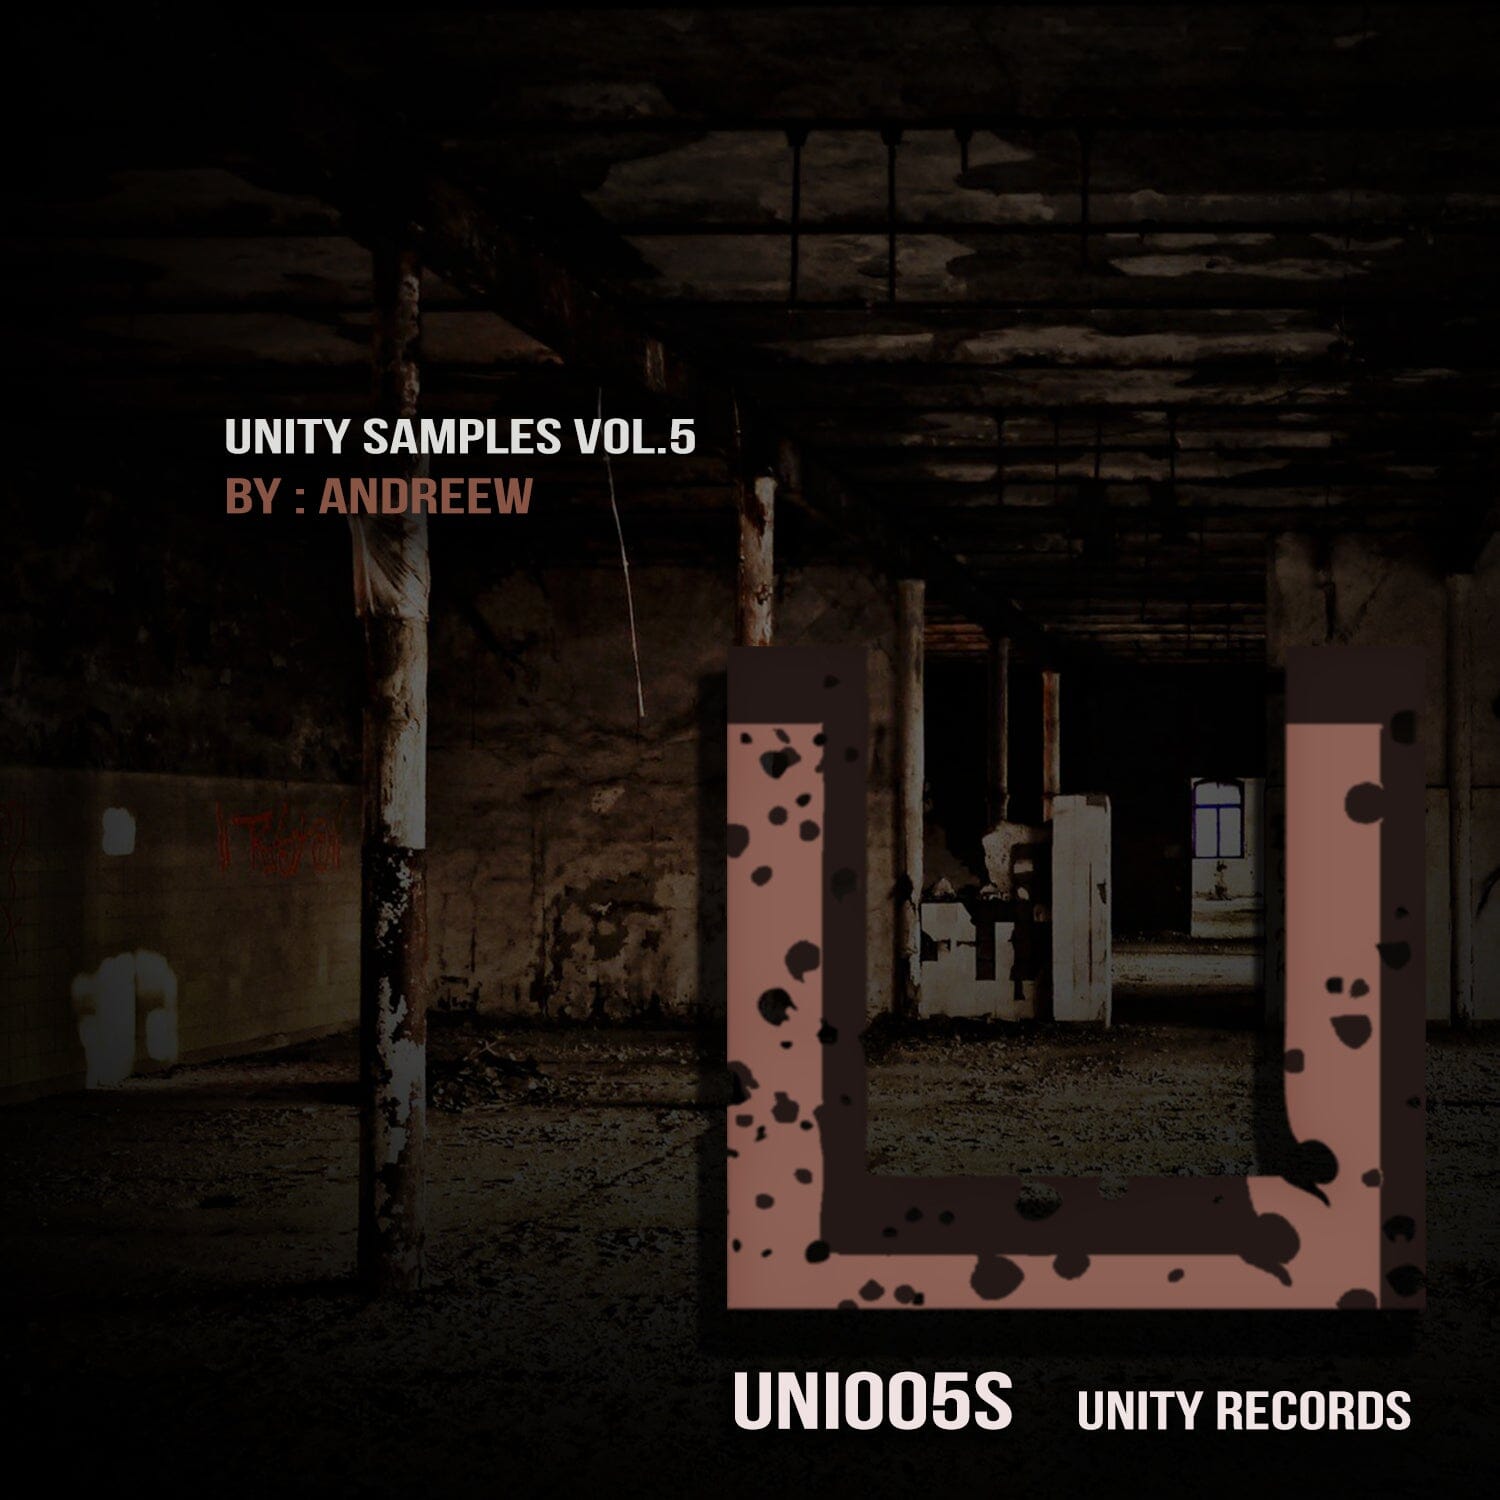 Unity Samples Vol.5 by Andreew Sample Pack Unity records